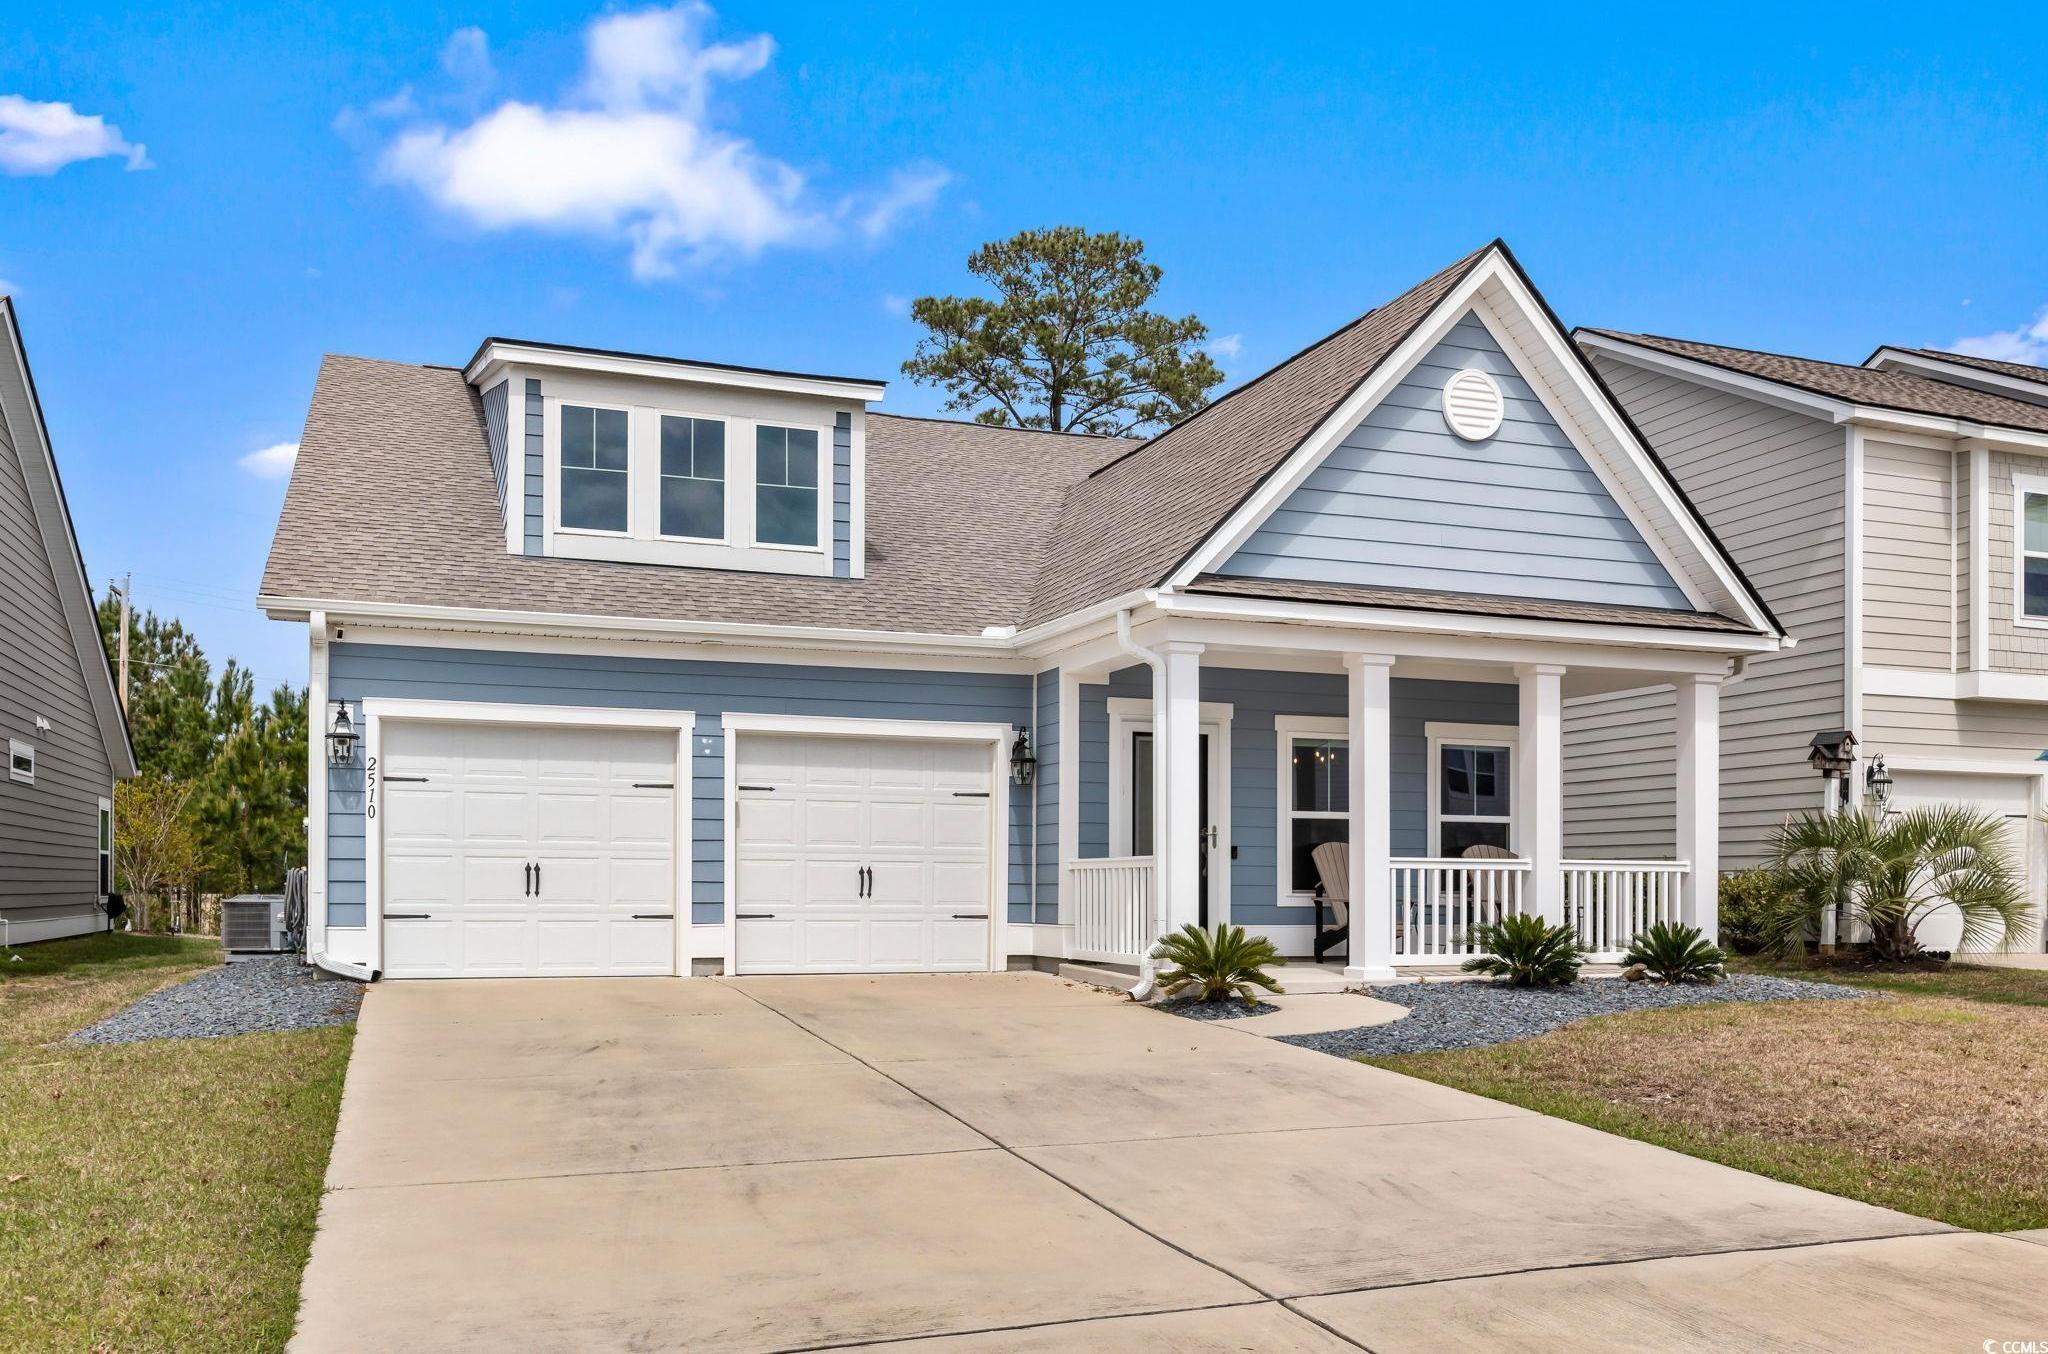 Photo one of 2510 Goldfinch Dr. Myrtle Beach SC 29577 | MLS 2407652